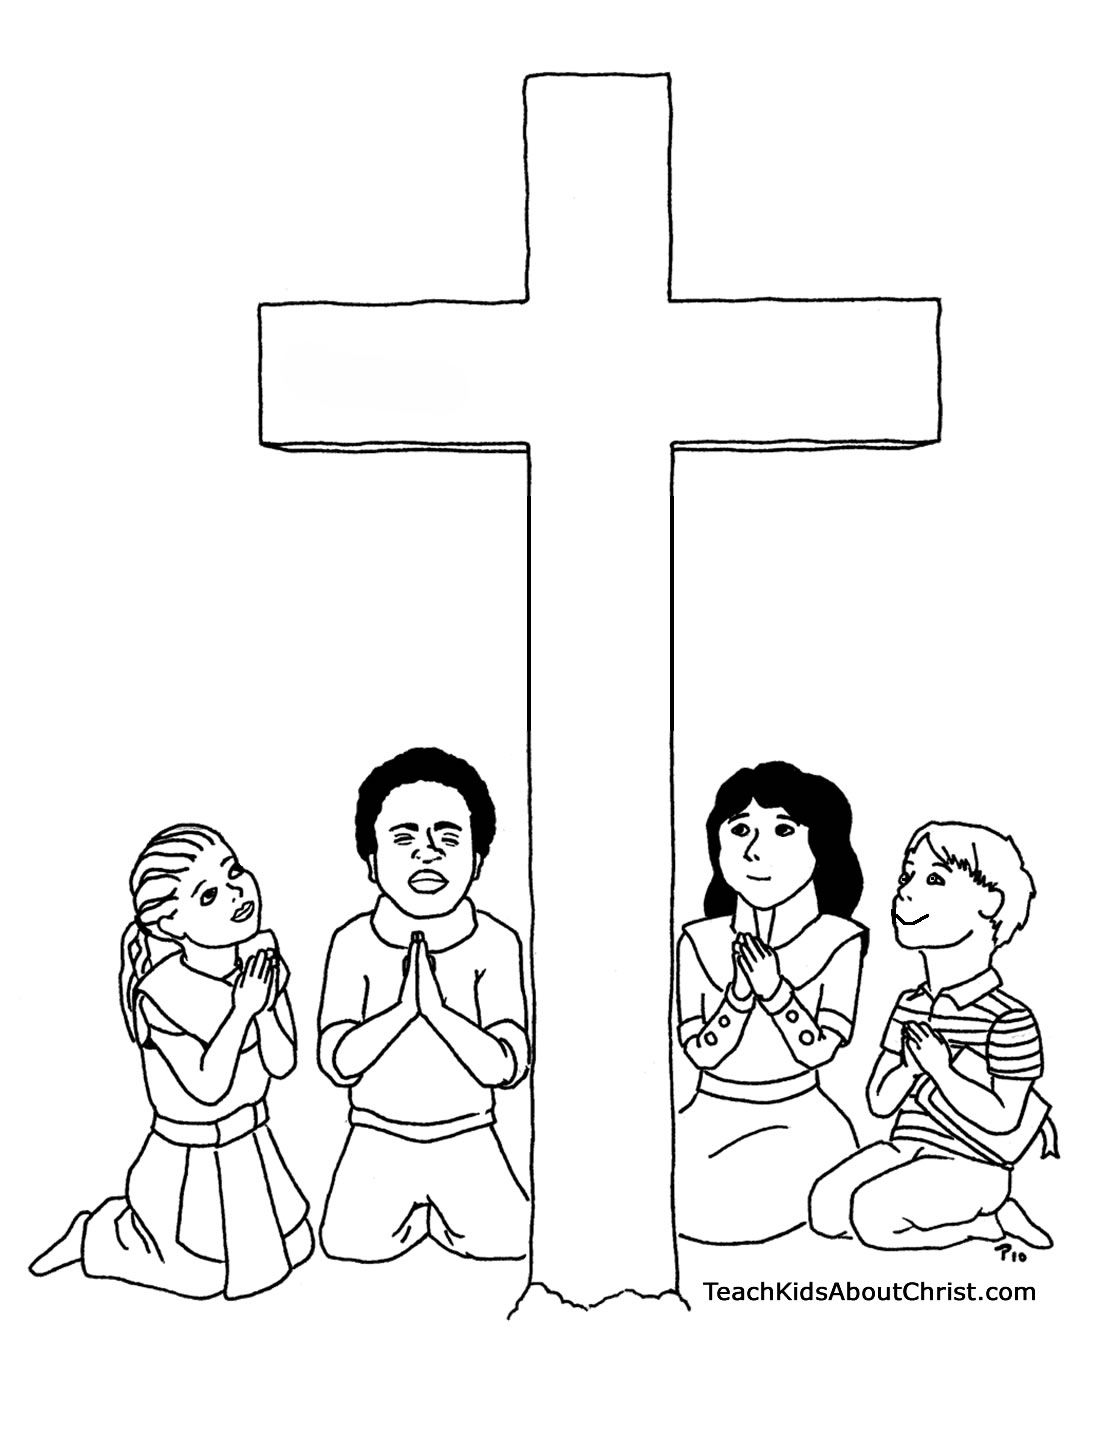 Children With Cross Coloring Page | Teach Kids About Christ